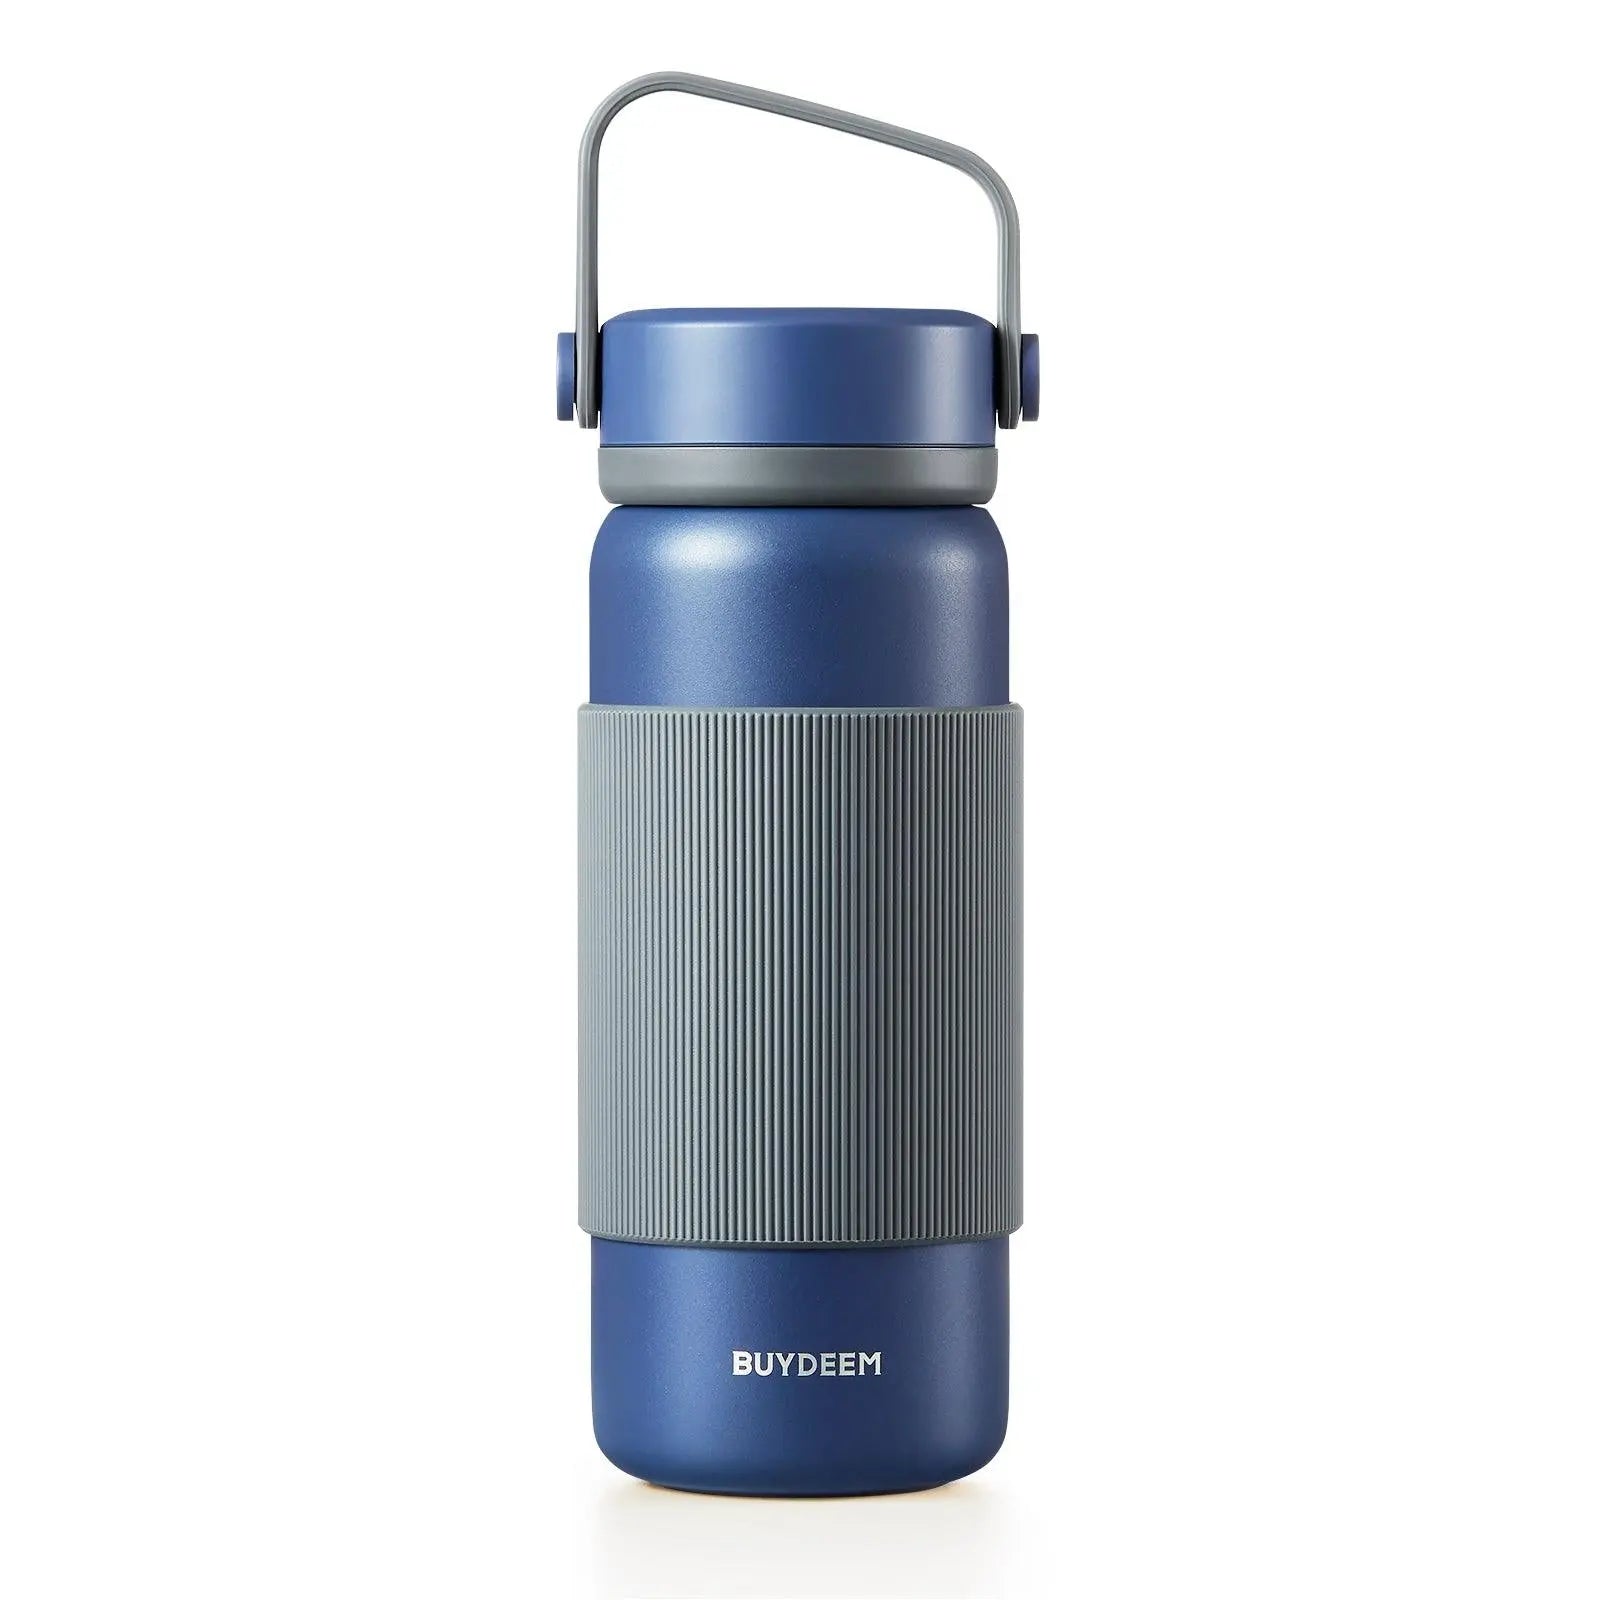 Tea in the Thermos